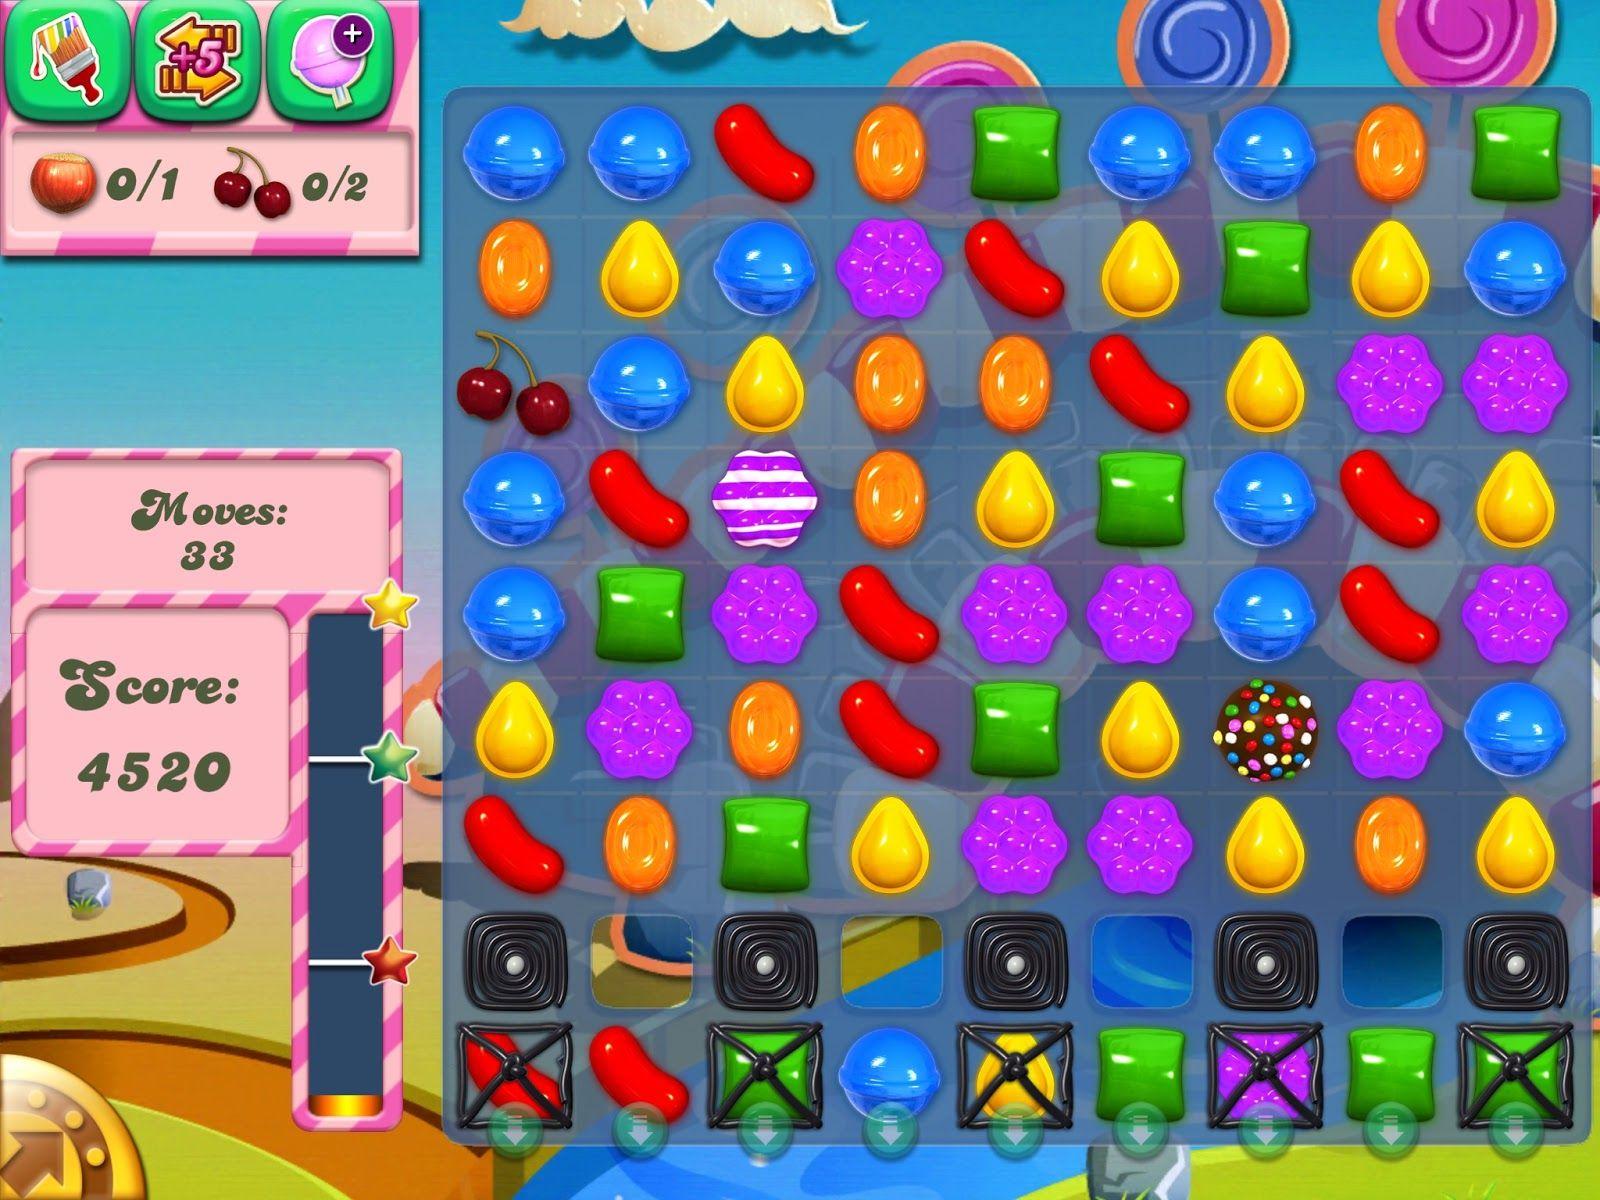 Some Thoughts on Candy Crush Saga